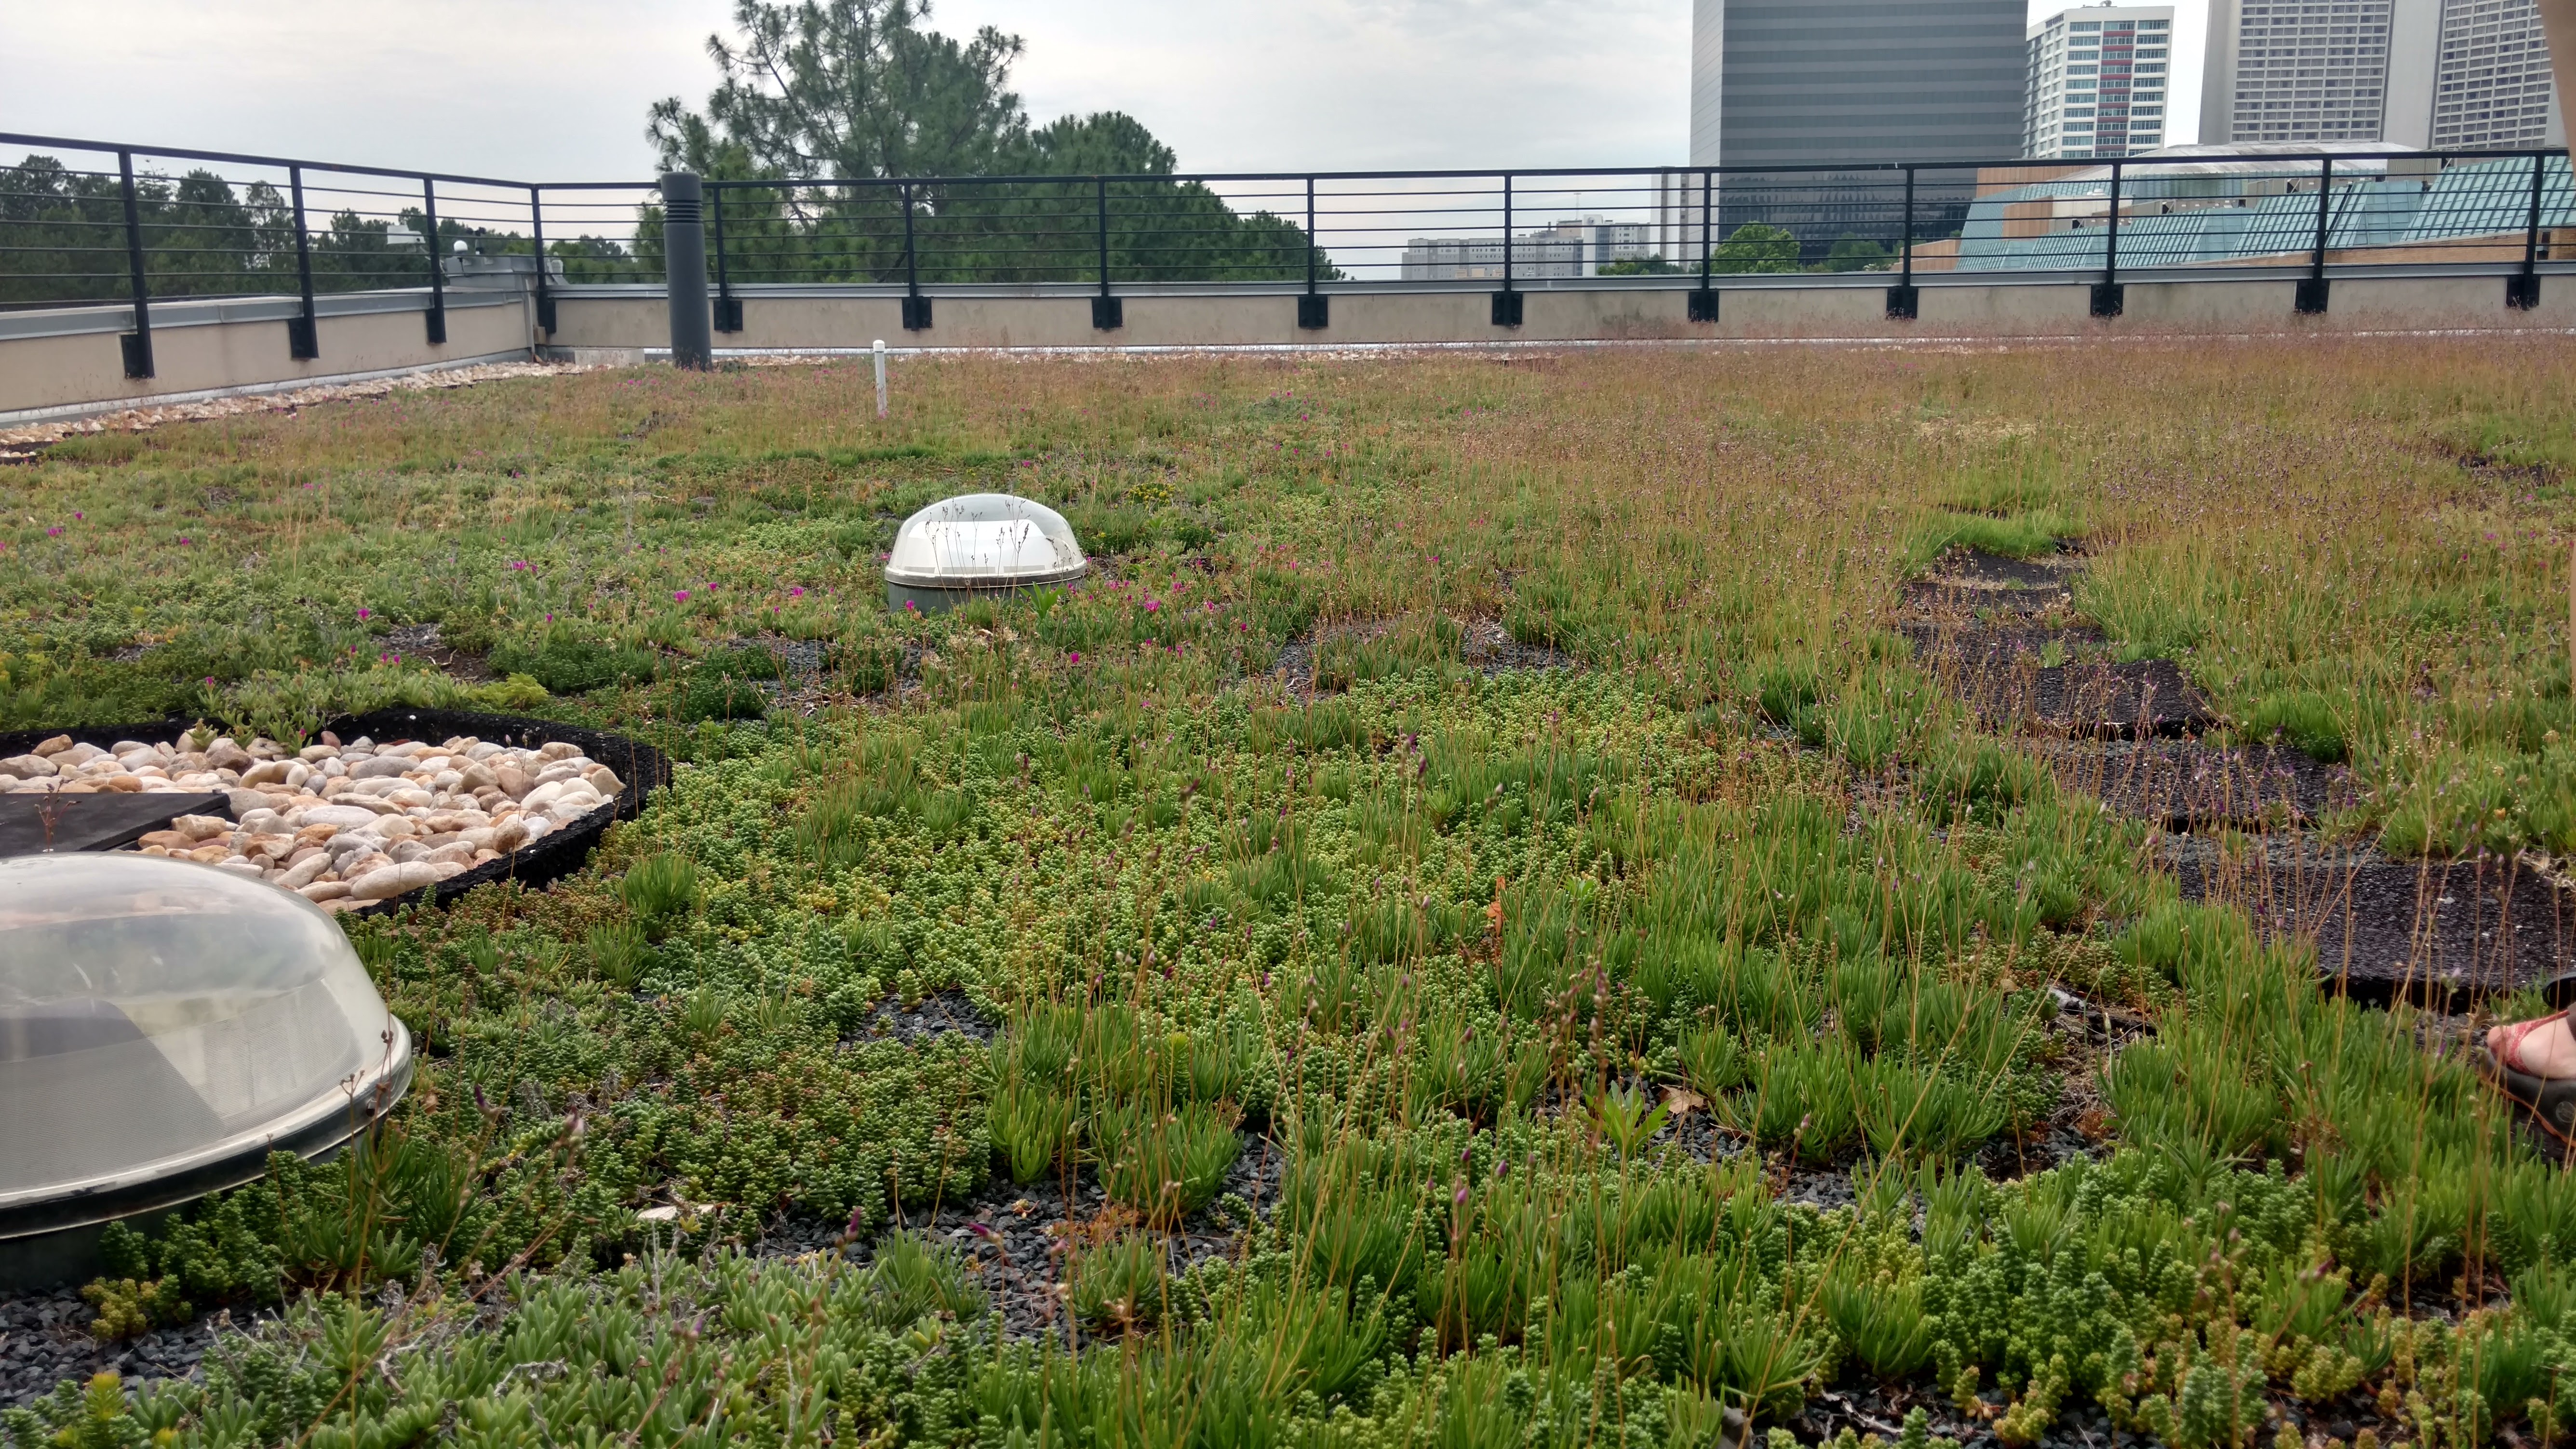 Stormwater and Green Infrastructure